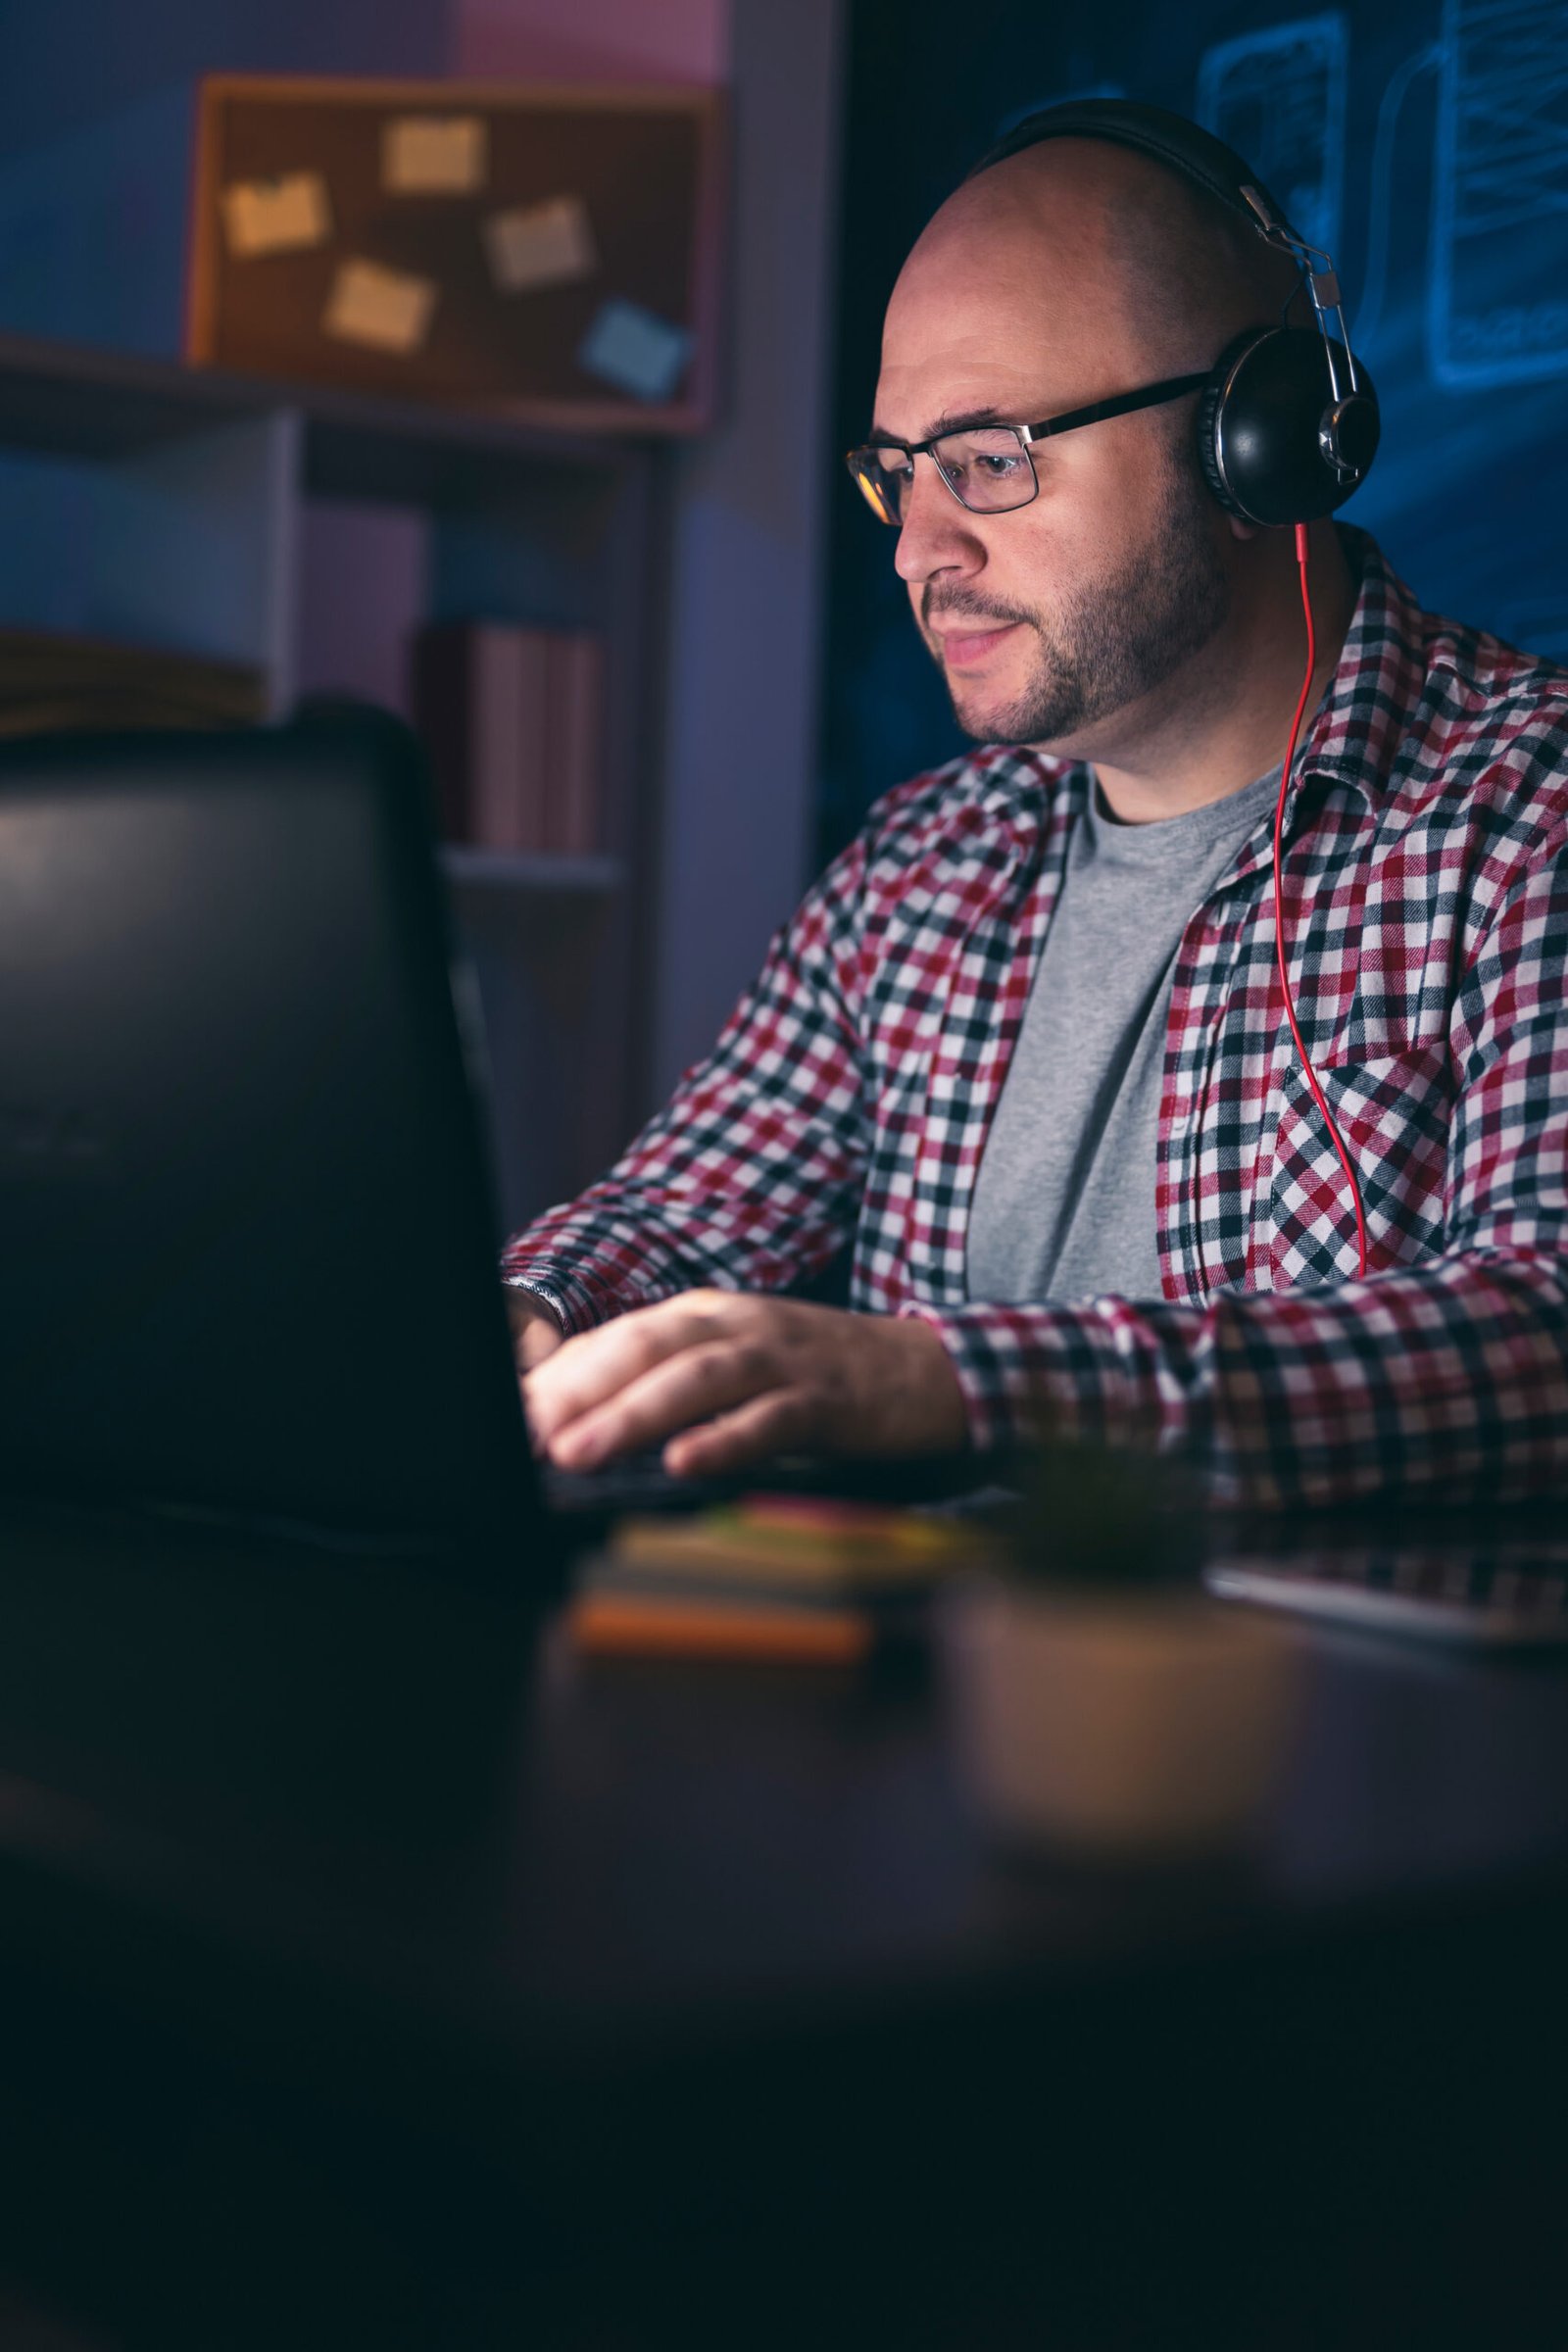 Man wearing headset working on laptop computer in home office late at night; web developer working overtime